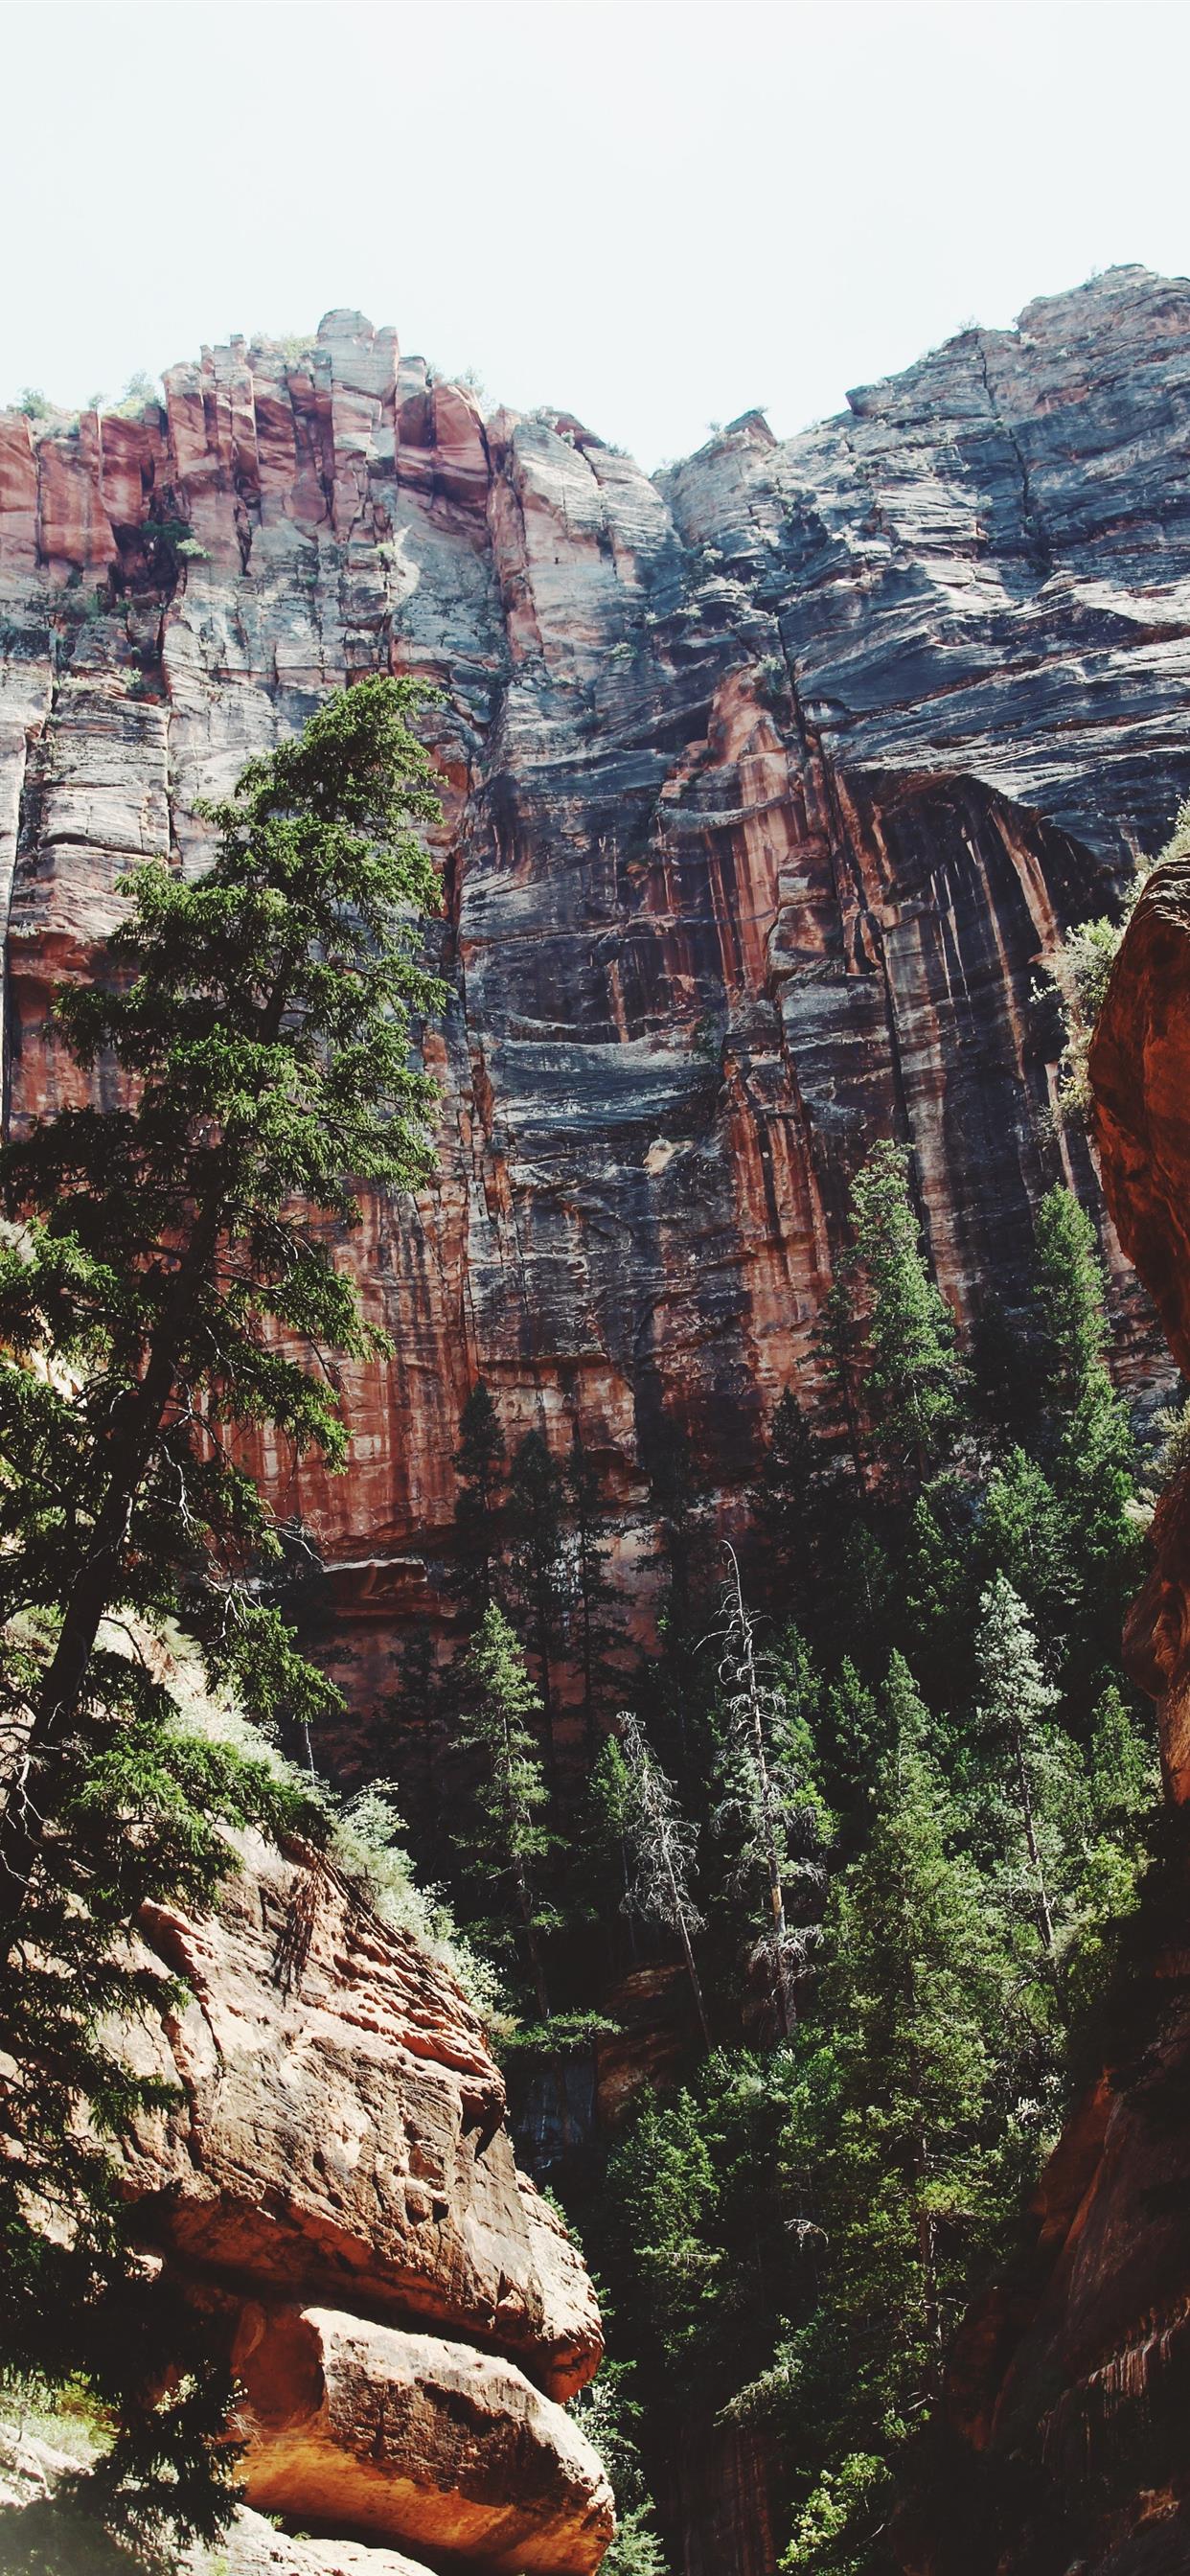 Zion National Park Springdale UT United States iPhone X Wallpaper Free Download